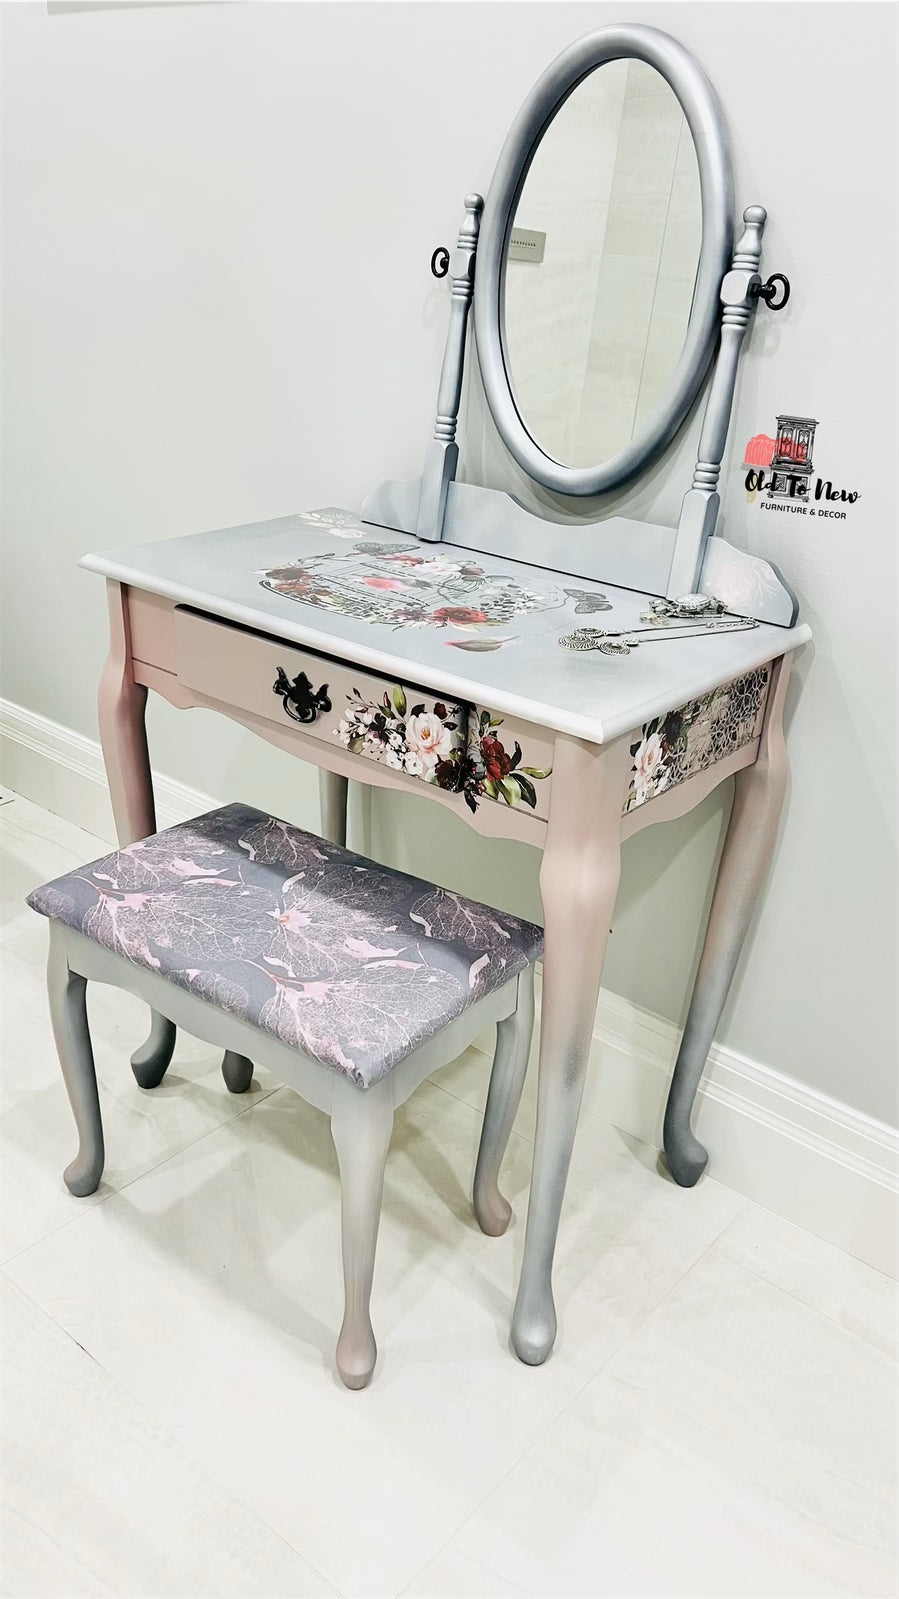 Luxury Vanity Dresser Set with Dressing Table & Stool. Painted a Metallic Sheen with Hokus Pokus Cage a’Oiseaux Transfer.